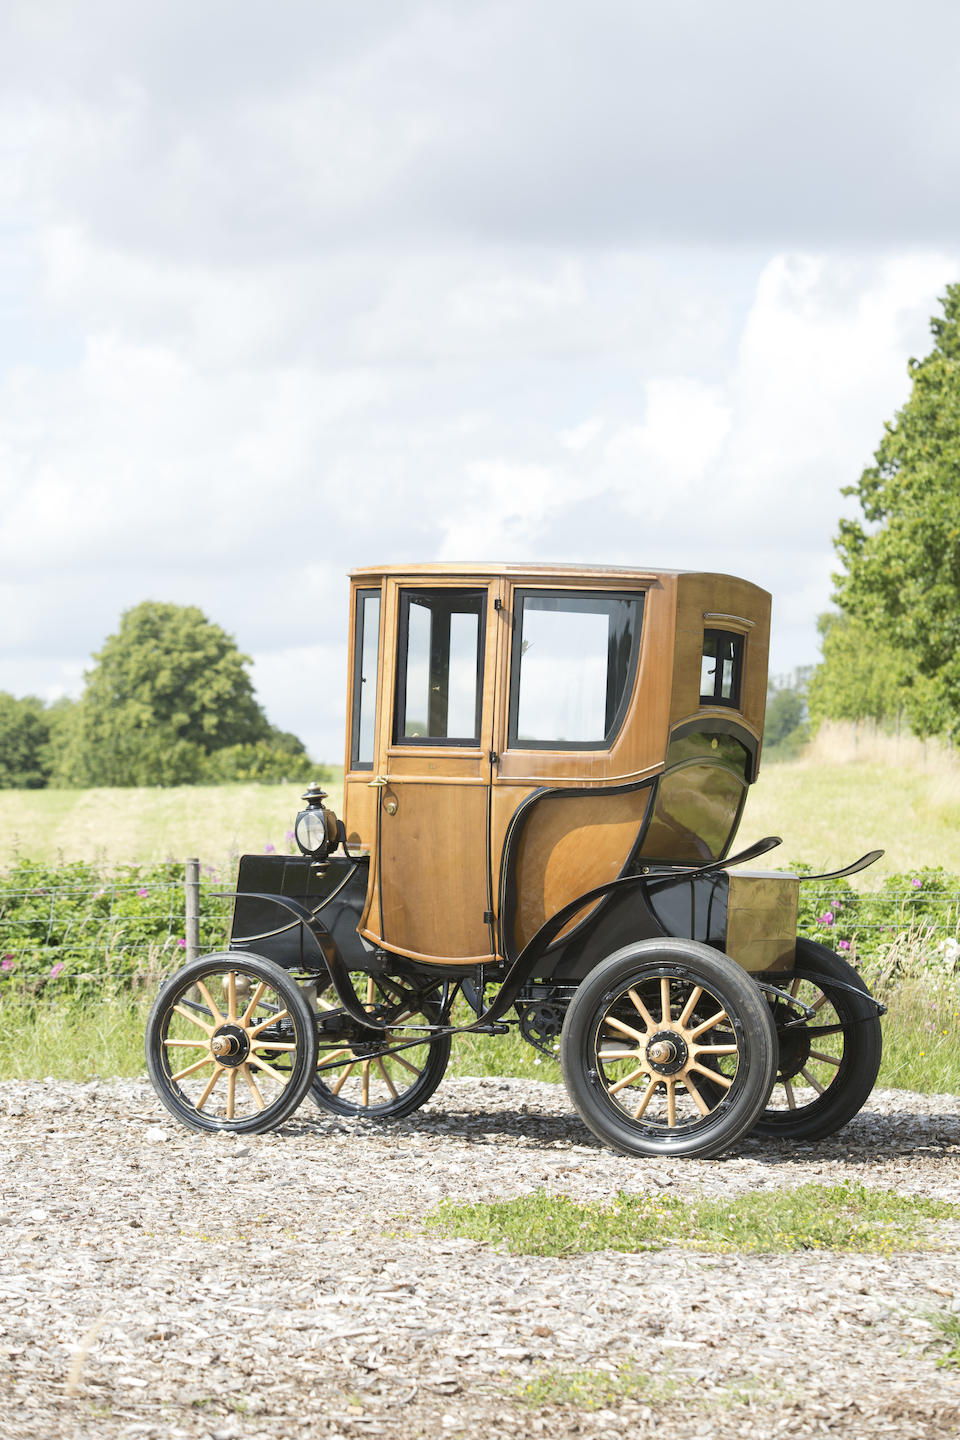 1905 WOODS ELECTRIC QUEENS VICTORIA BROUGHAM  Chassis no. 2843